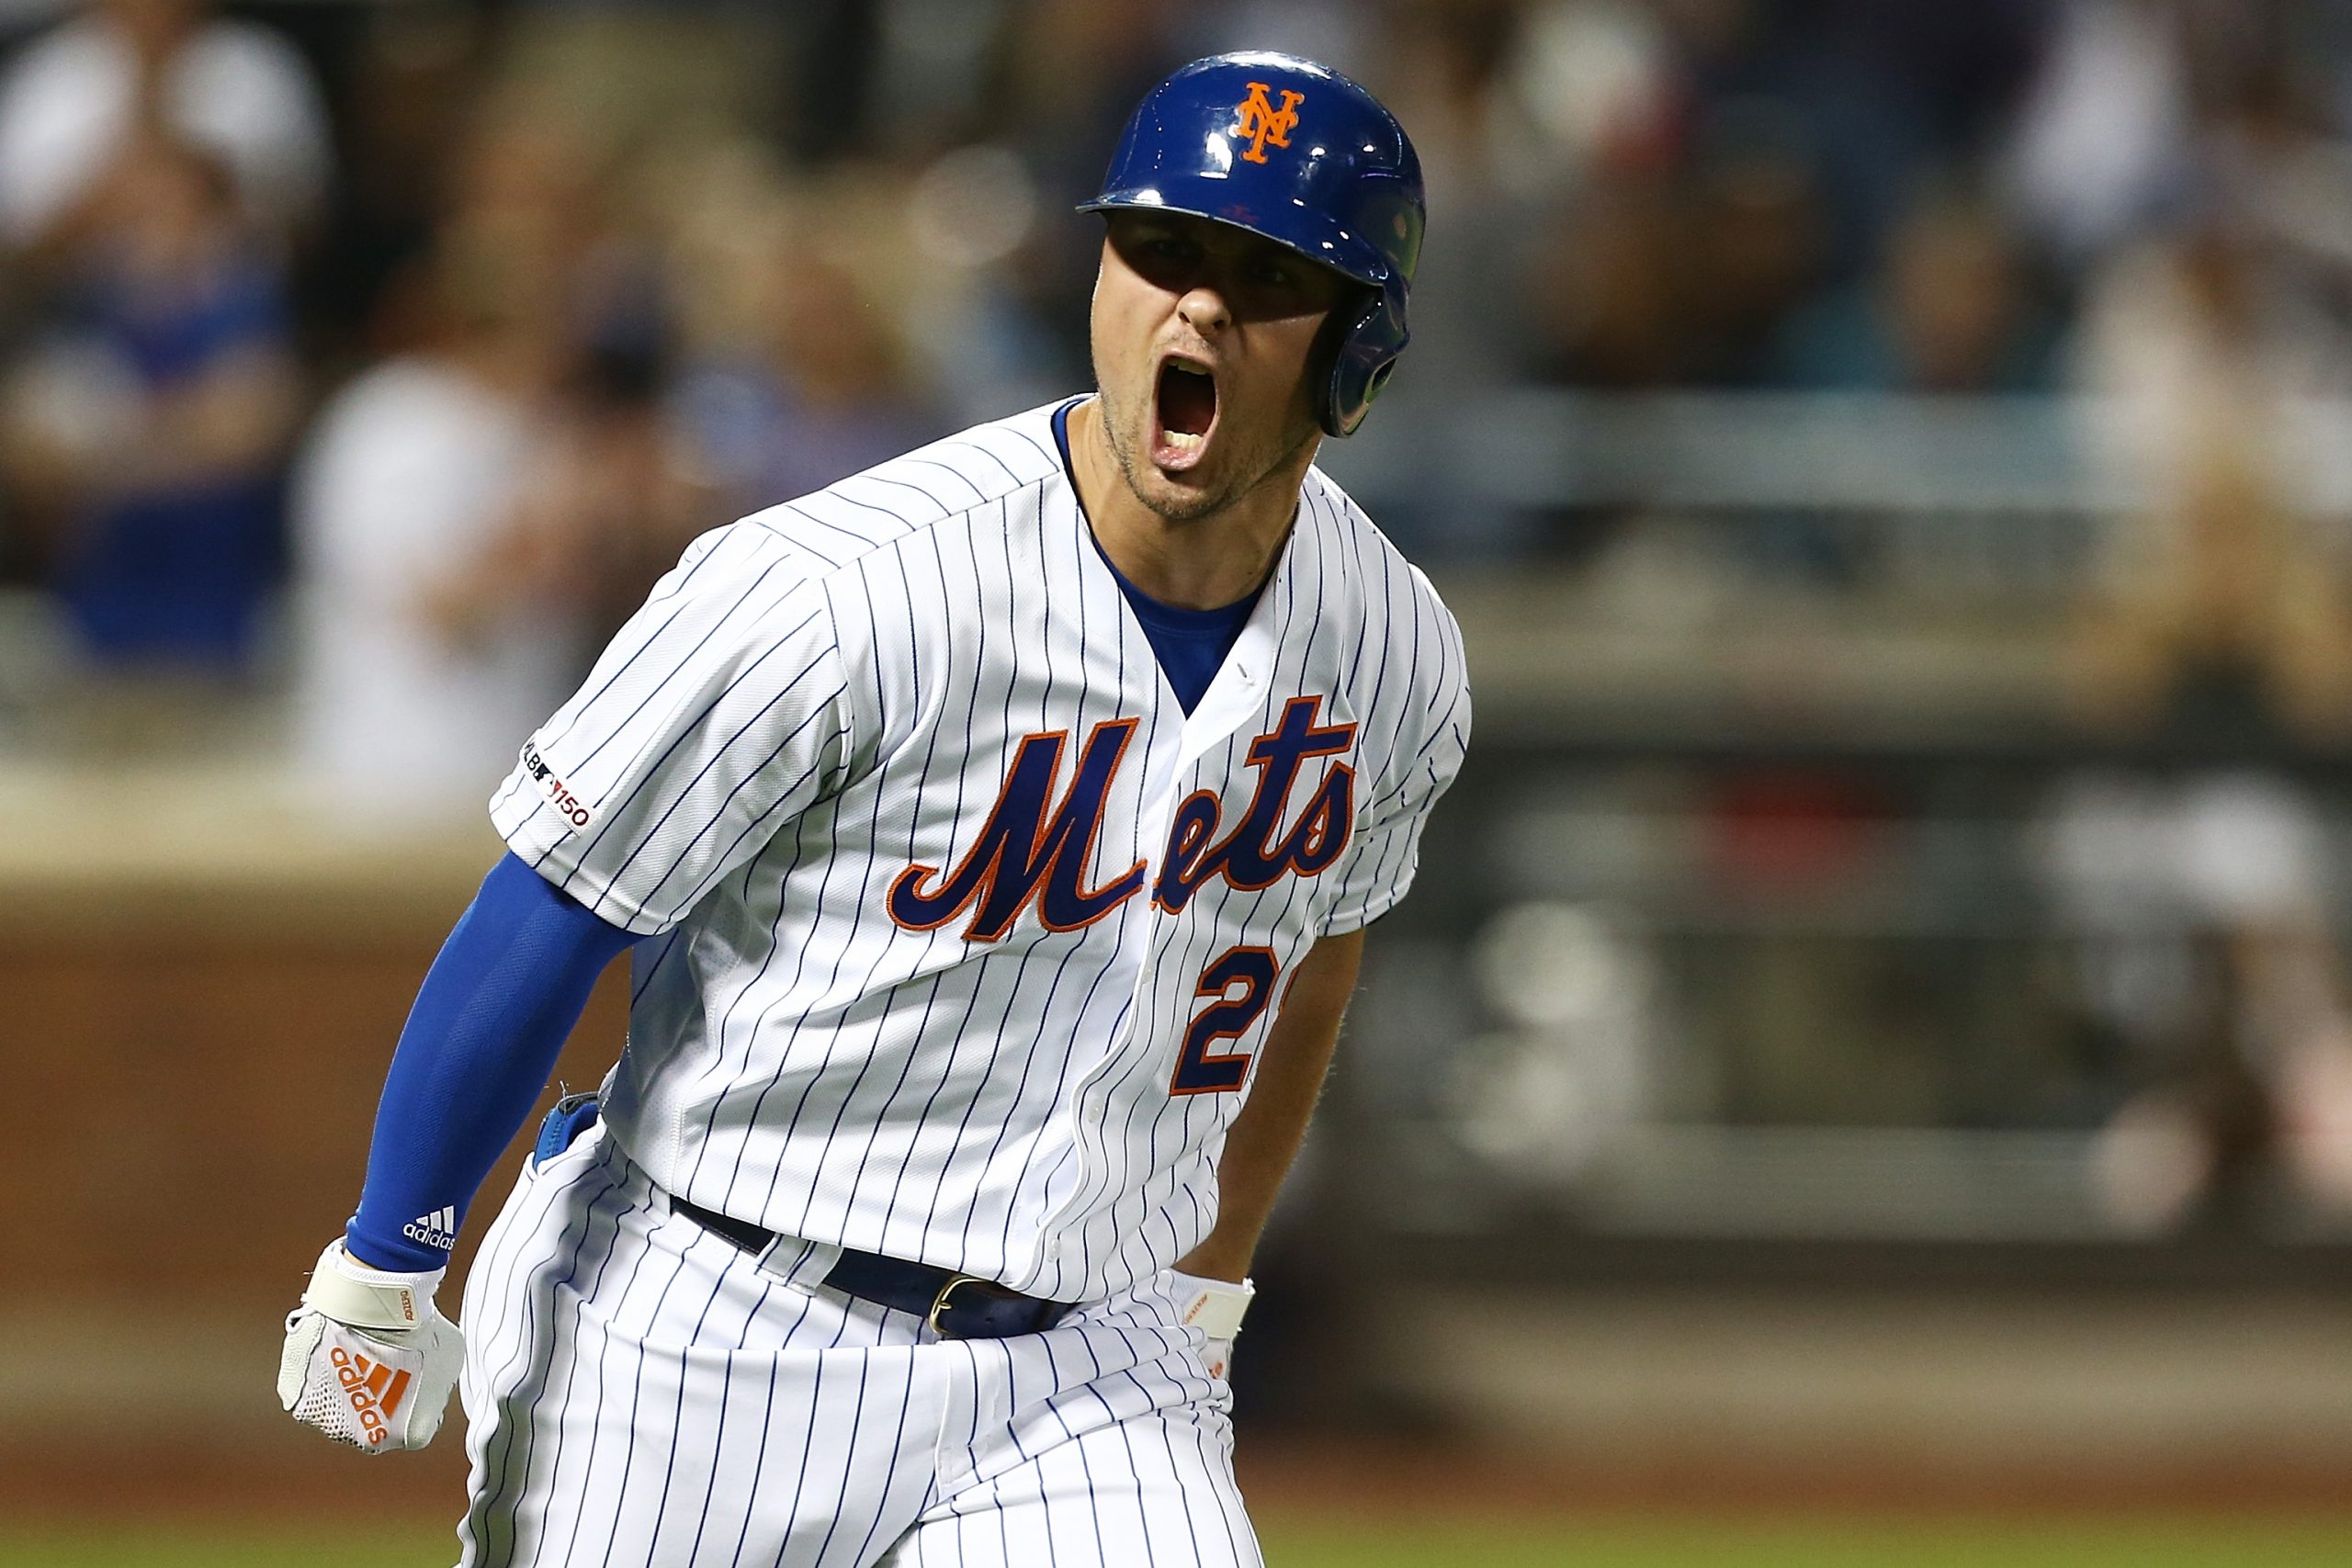 First New York team to get crack at Astros? The Mets